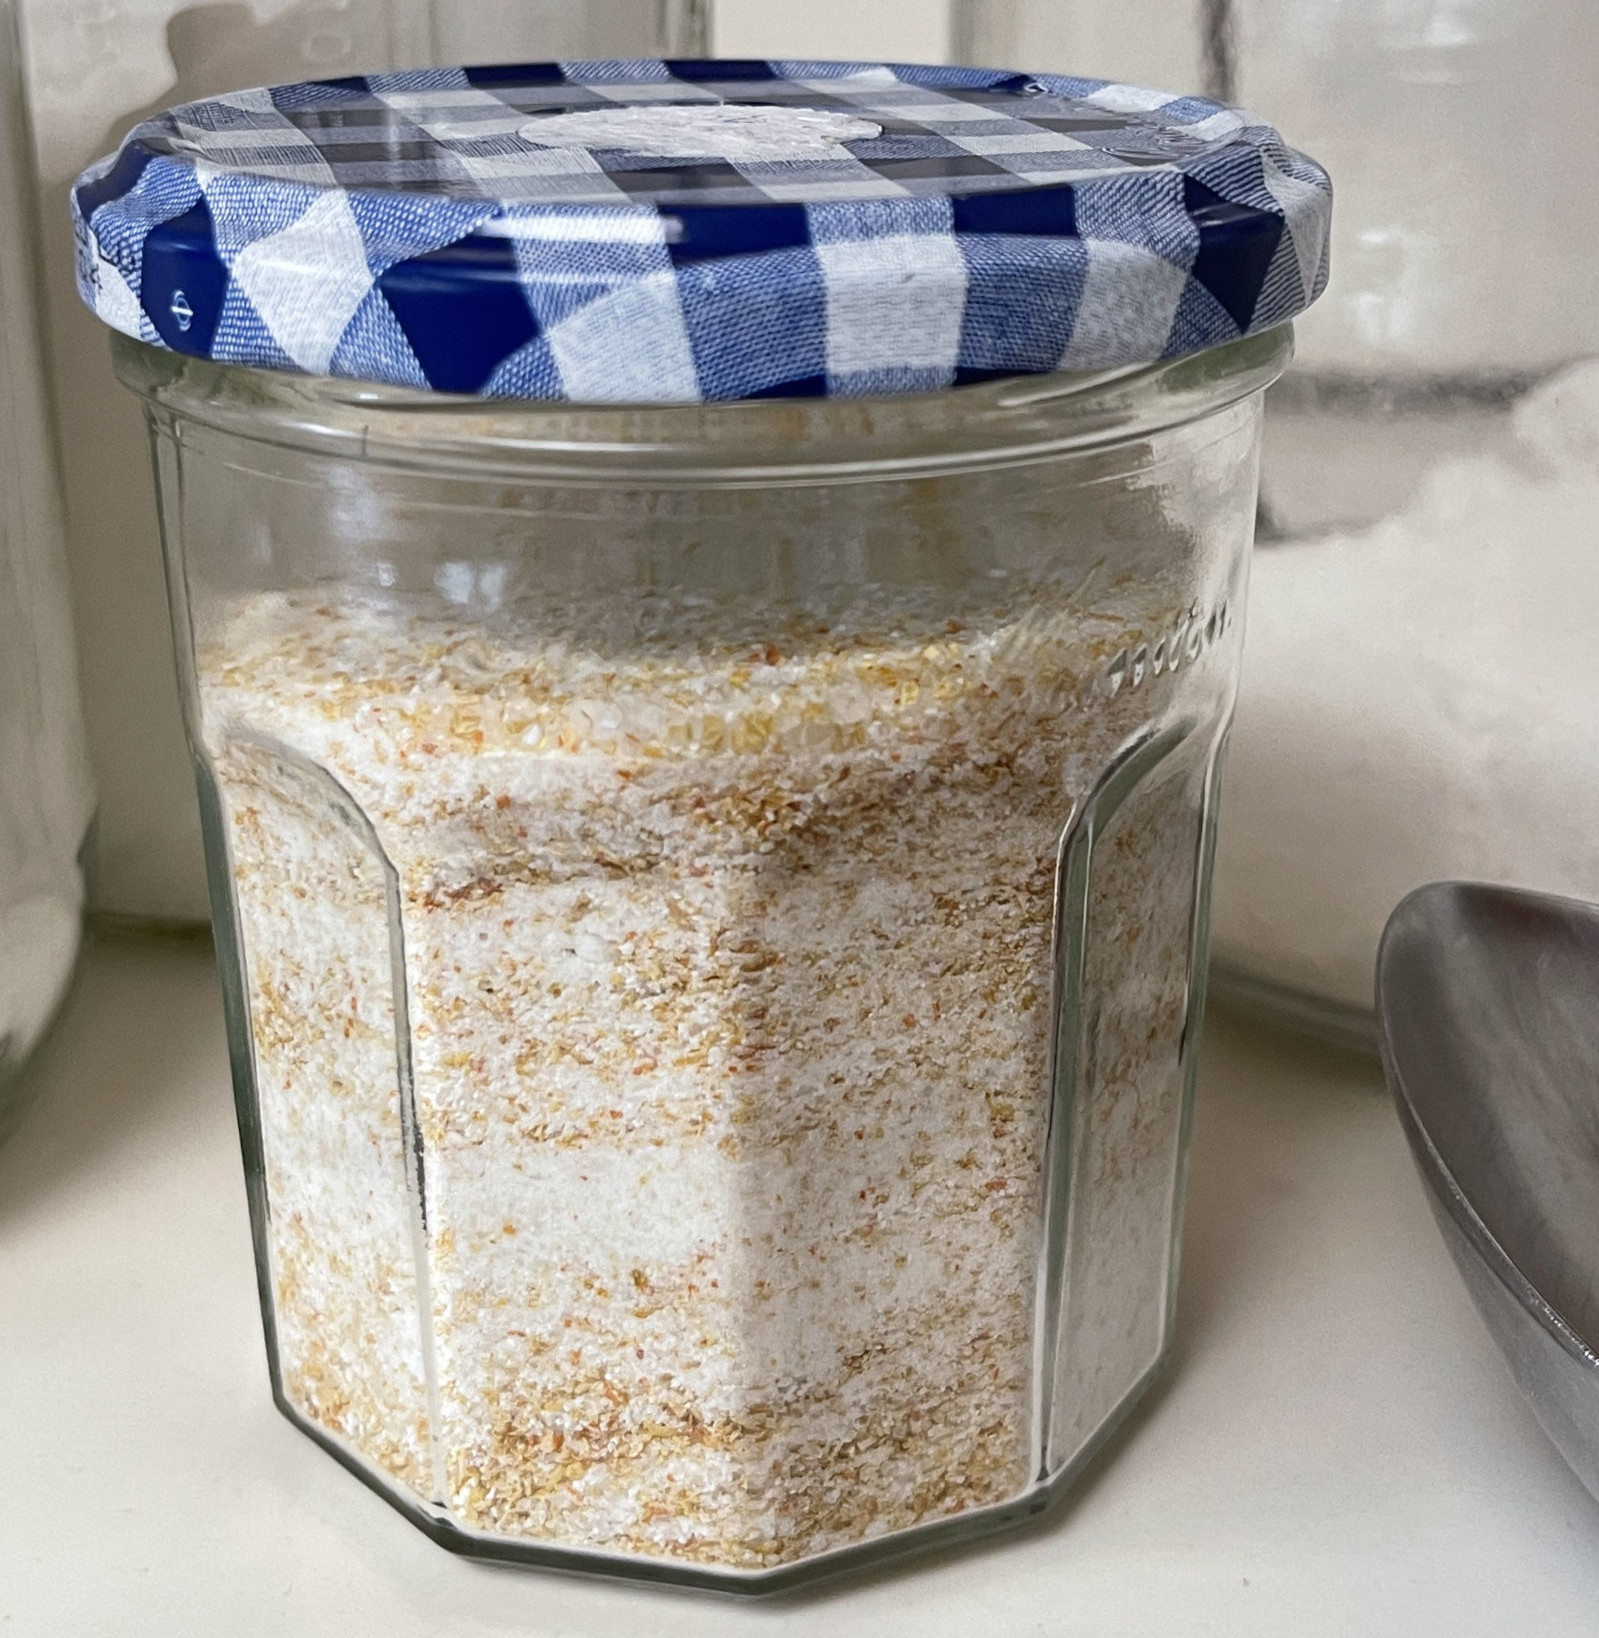 A jam jar with a blue lid sits on a while counter. The jam jar is filled with homemade scouring powder containing bits of dried citrus zest.